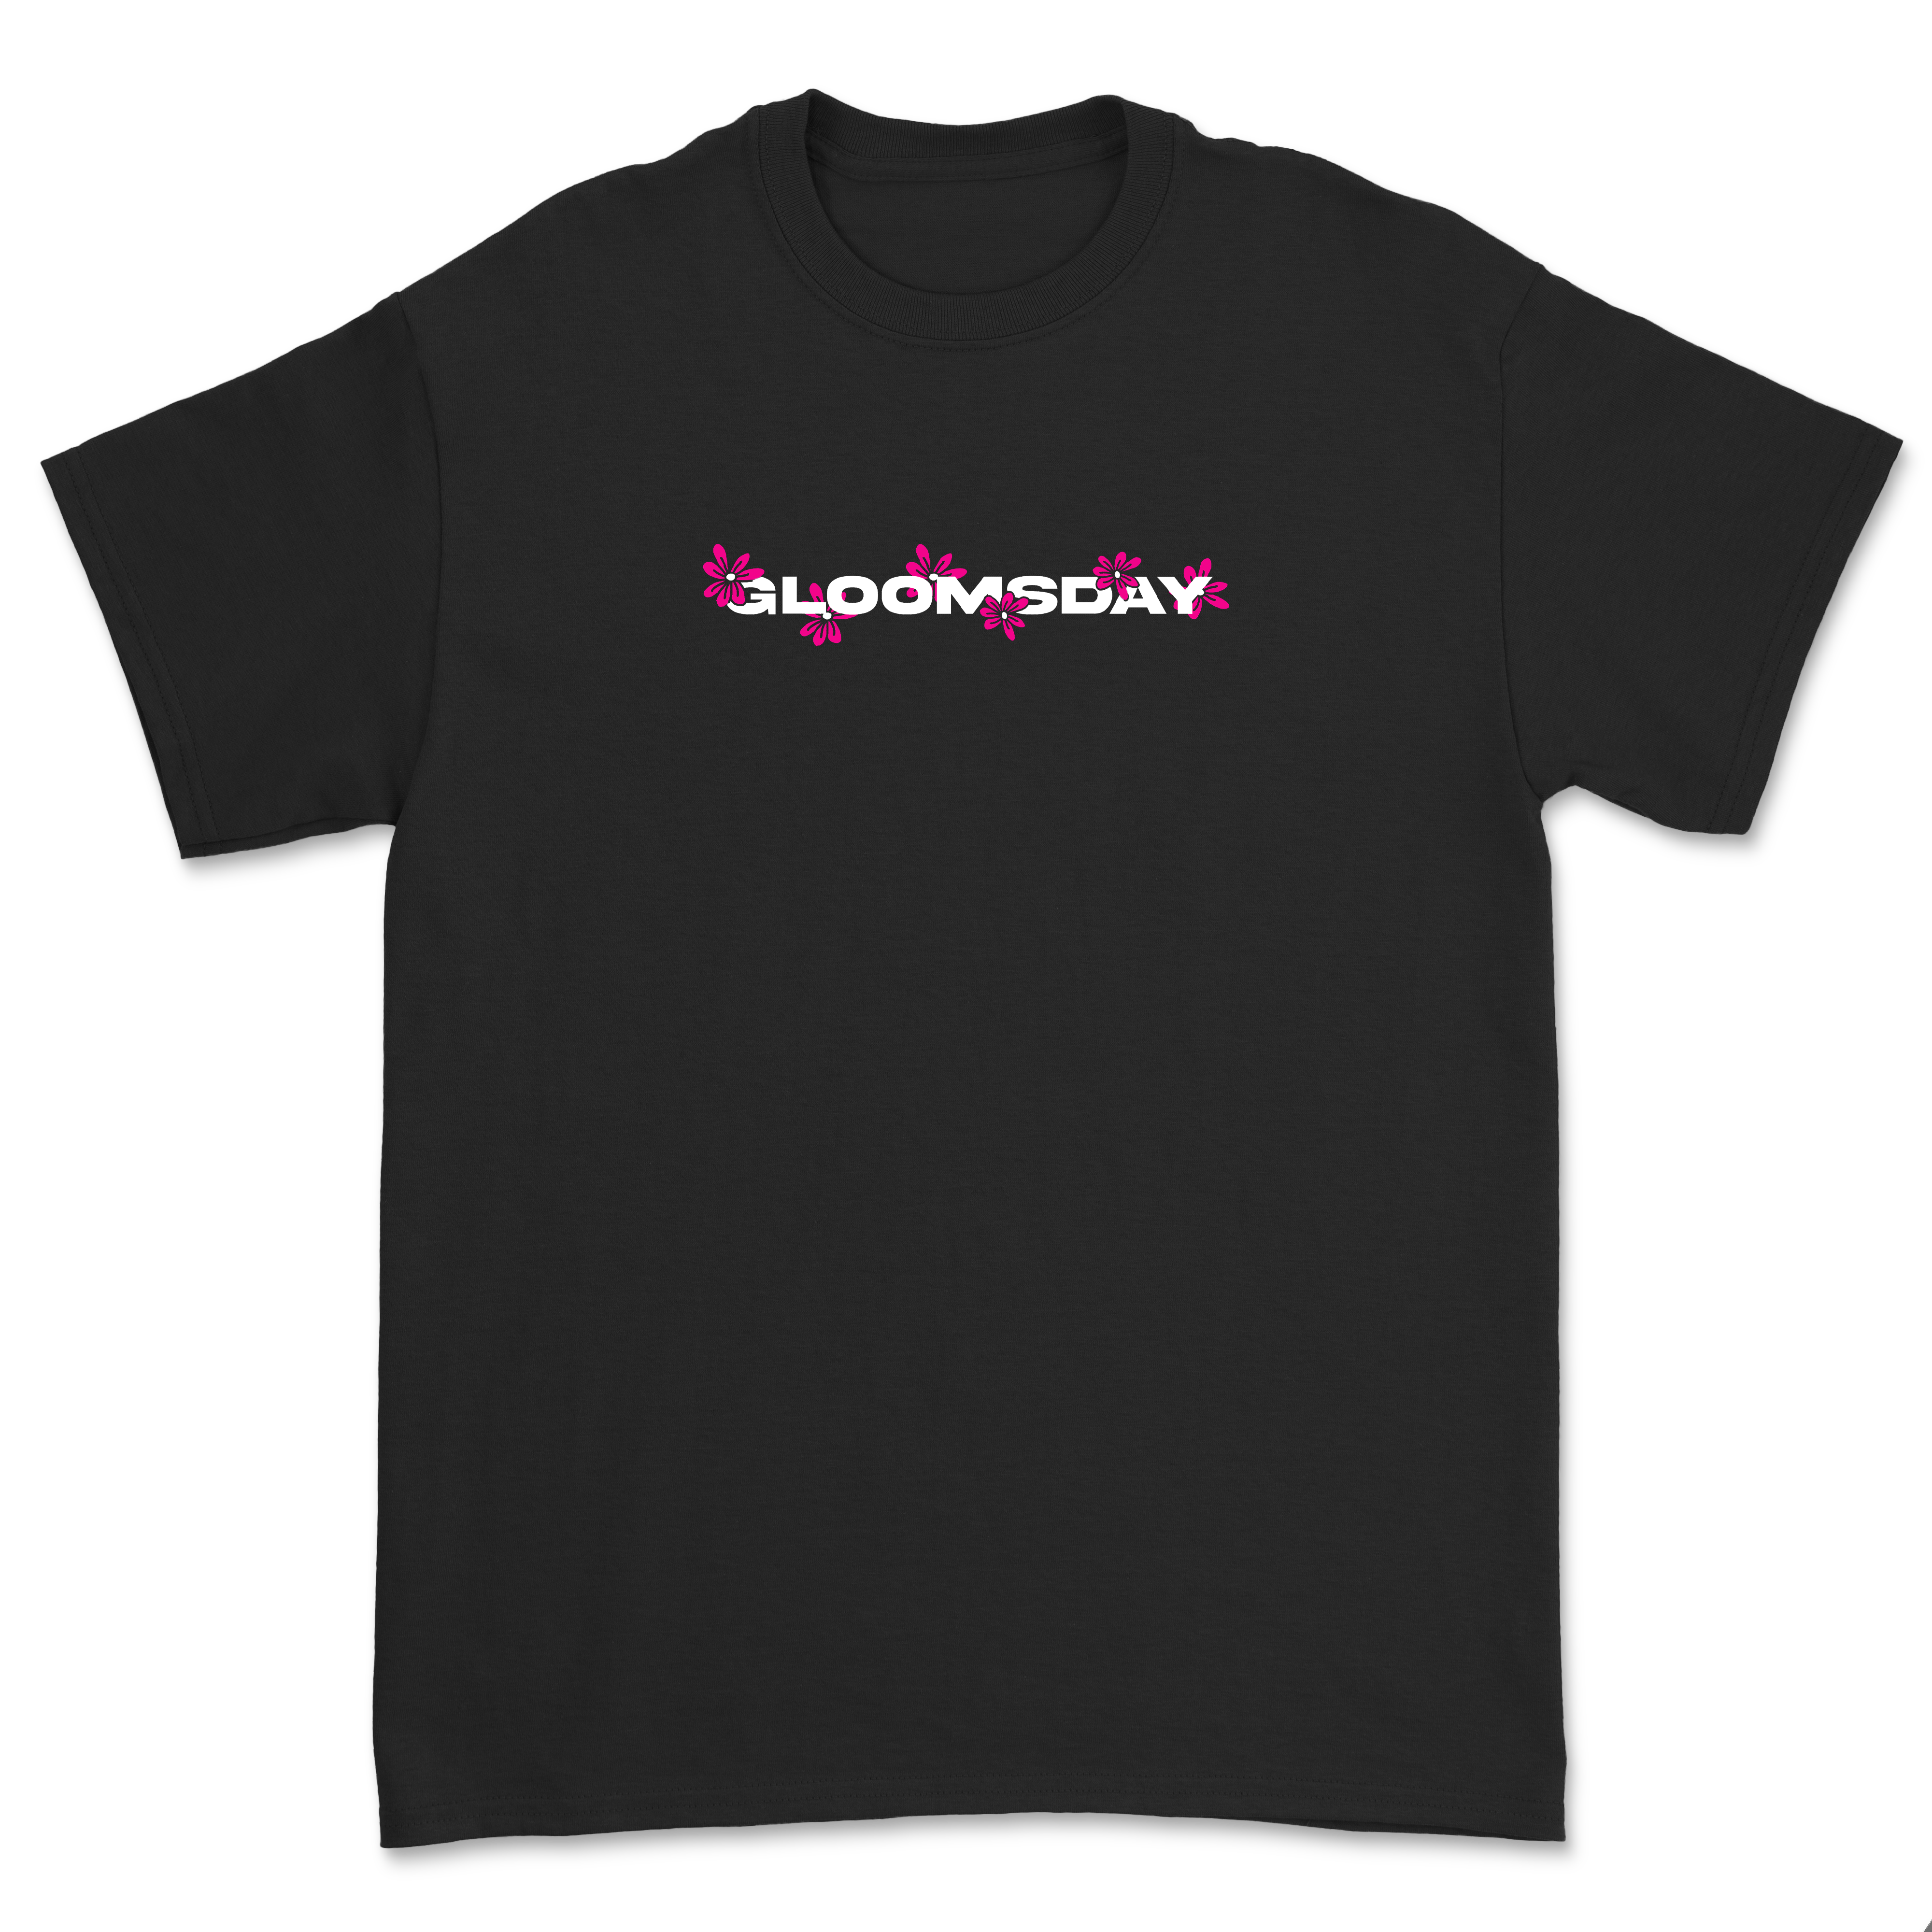 GLOOMSDAY - Smell The Flowers Shirt